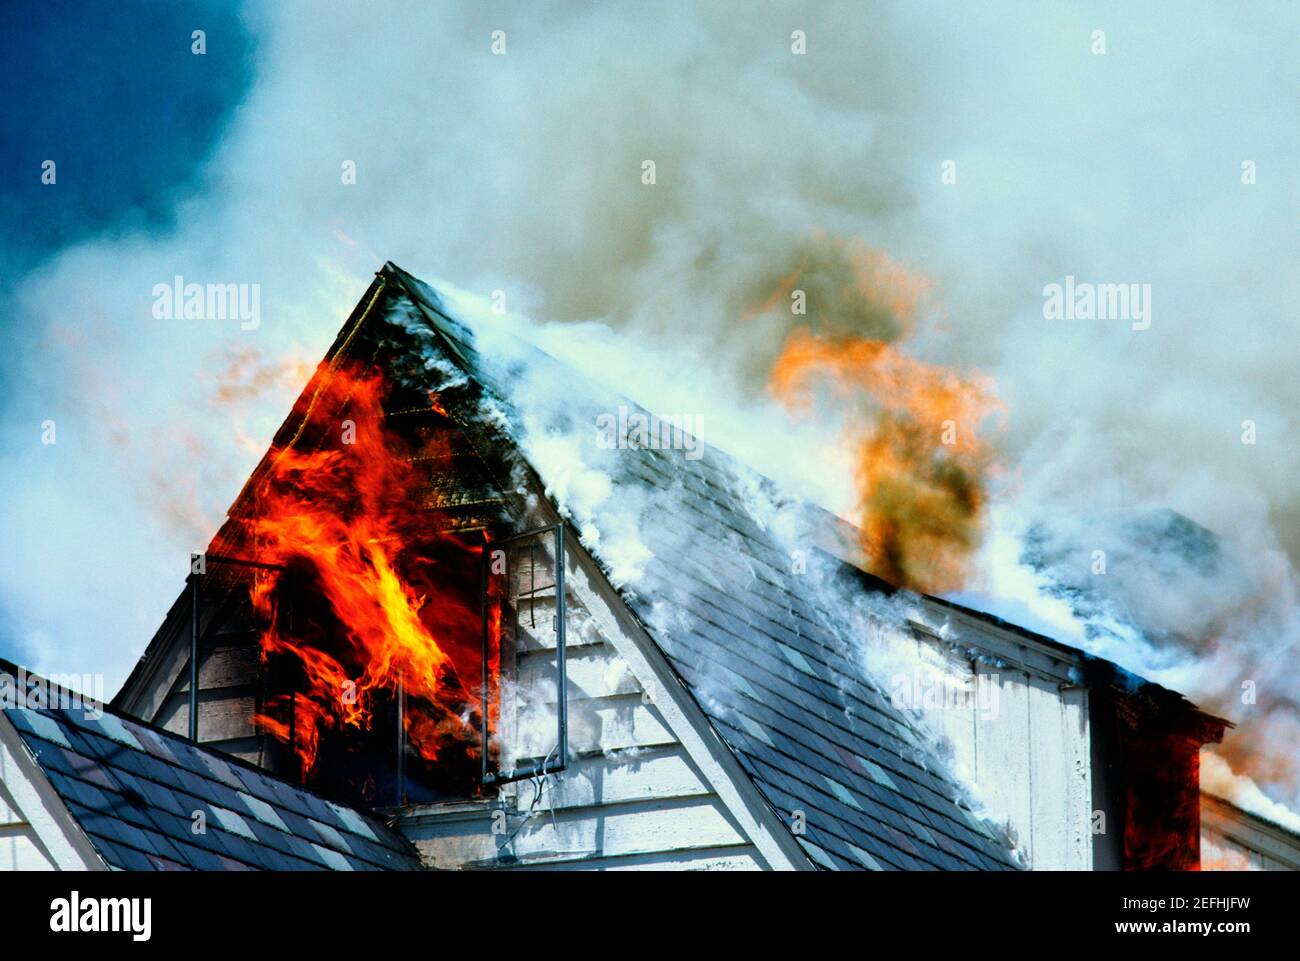 High section view of a house burning, Montgomery County, Maryland, USA Stock Photo